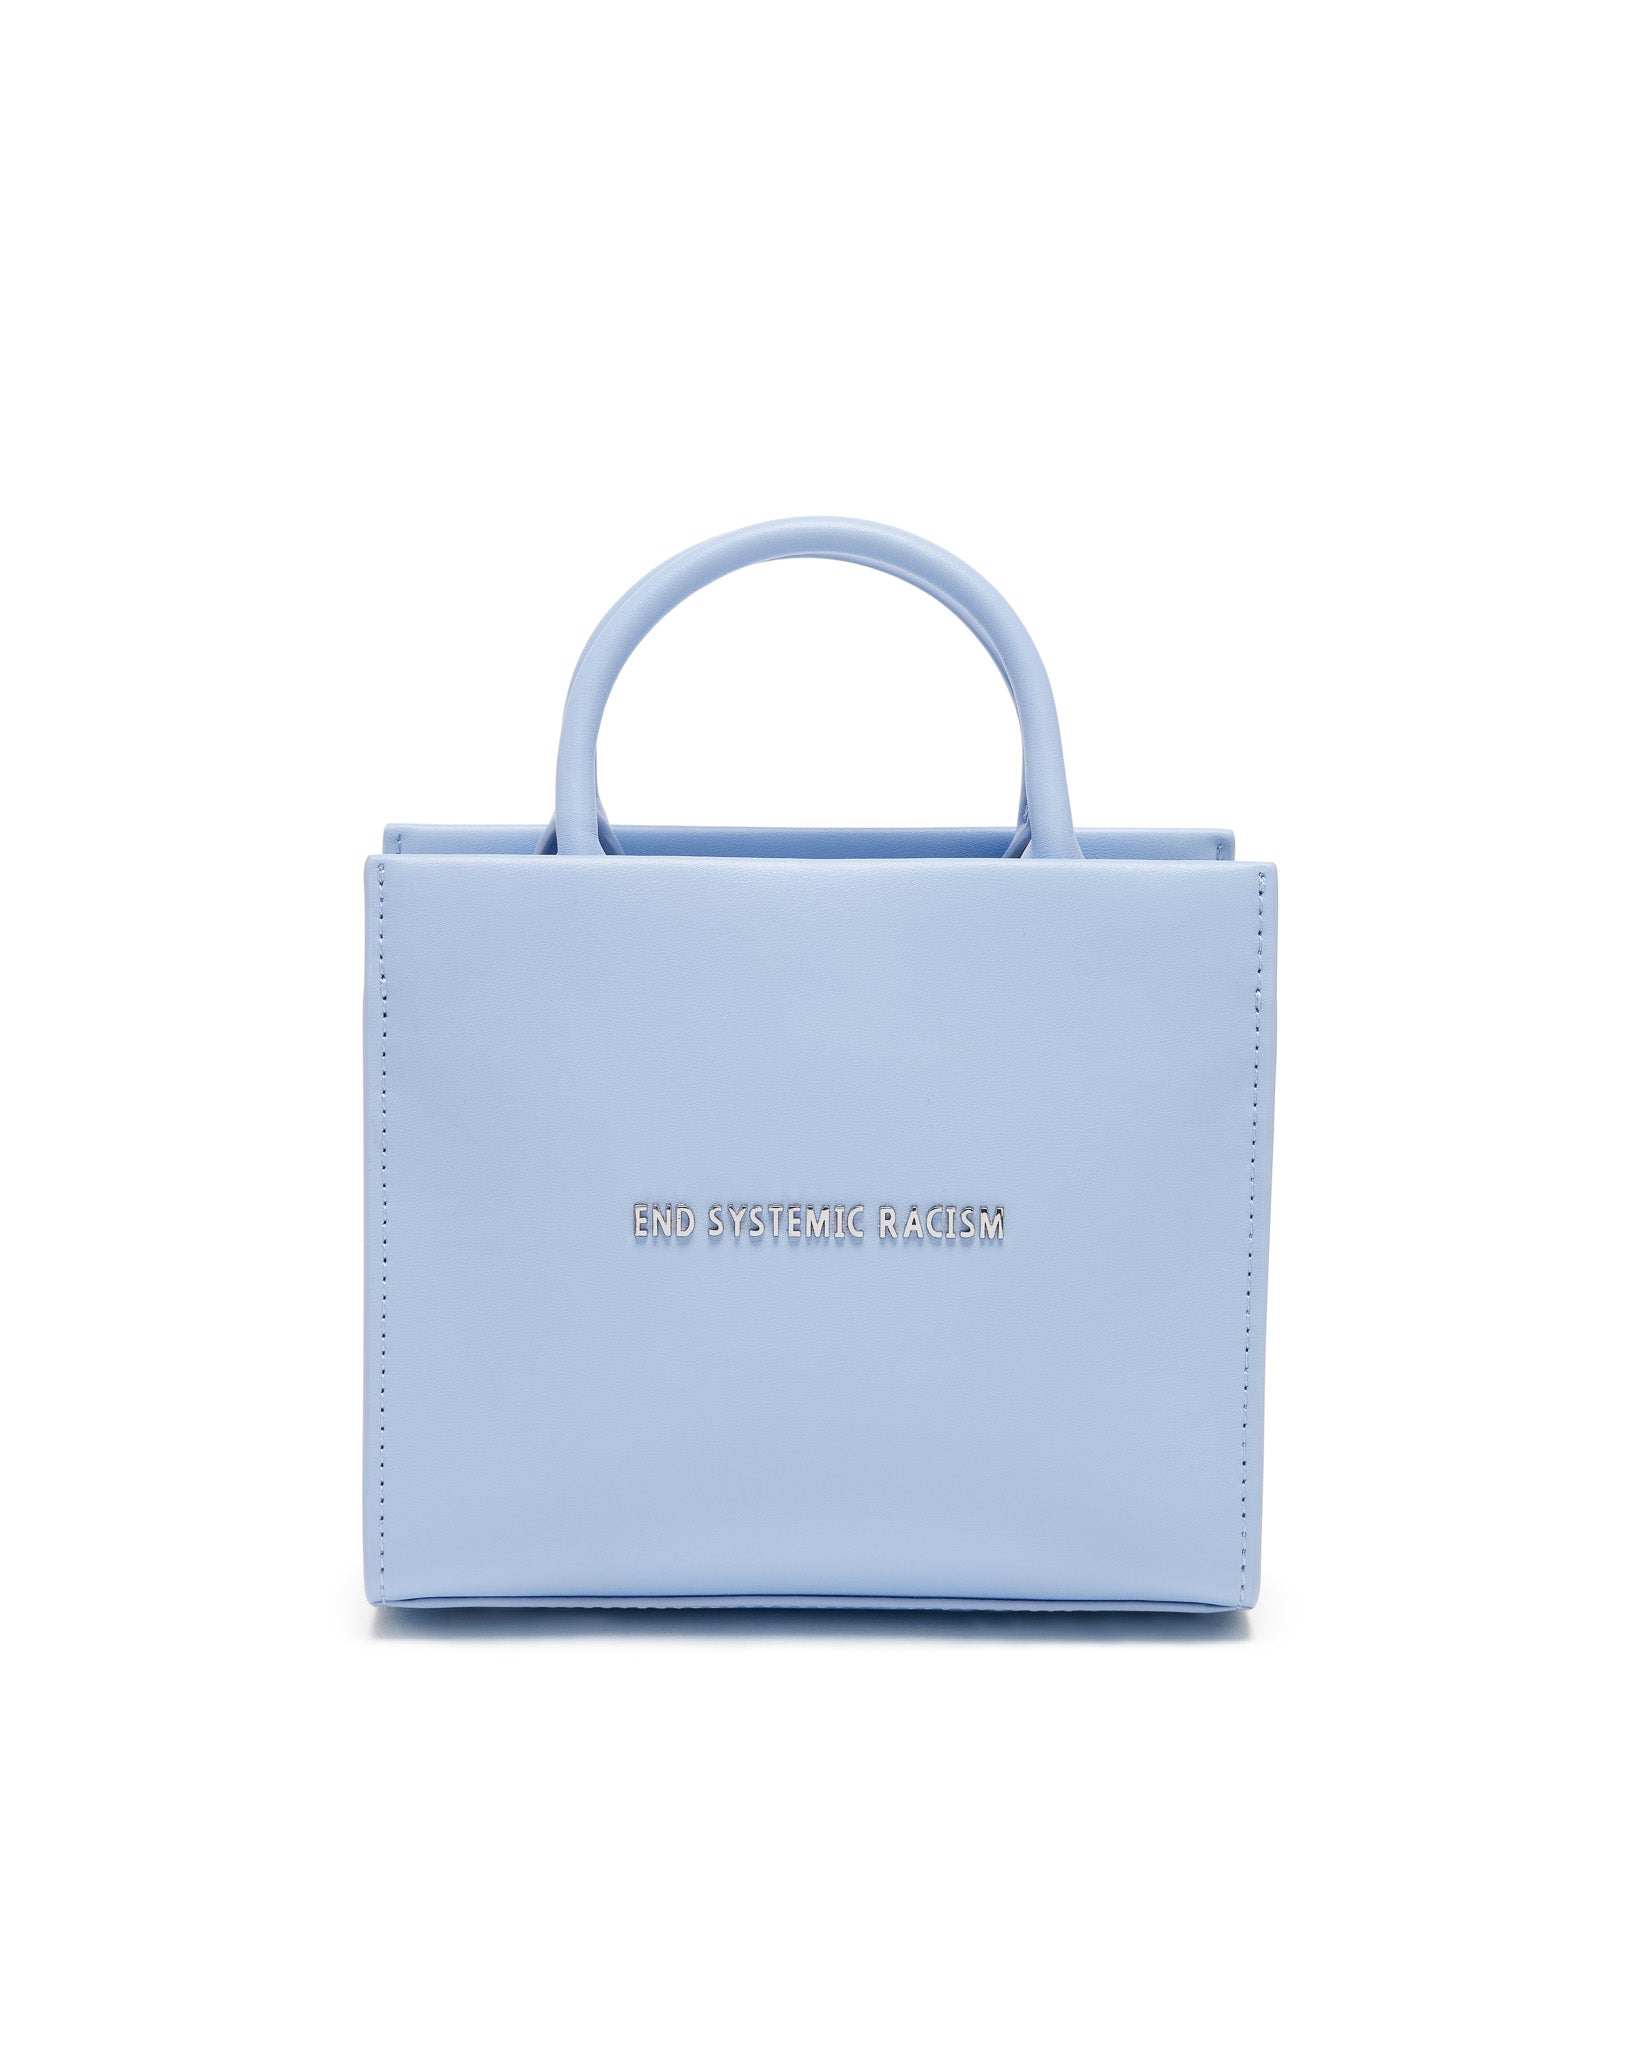 Shopping Tote bag in blue leather